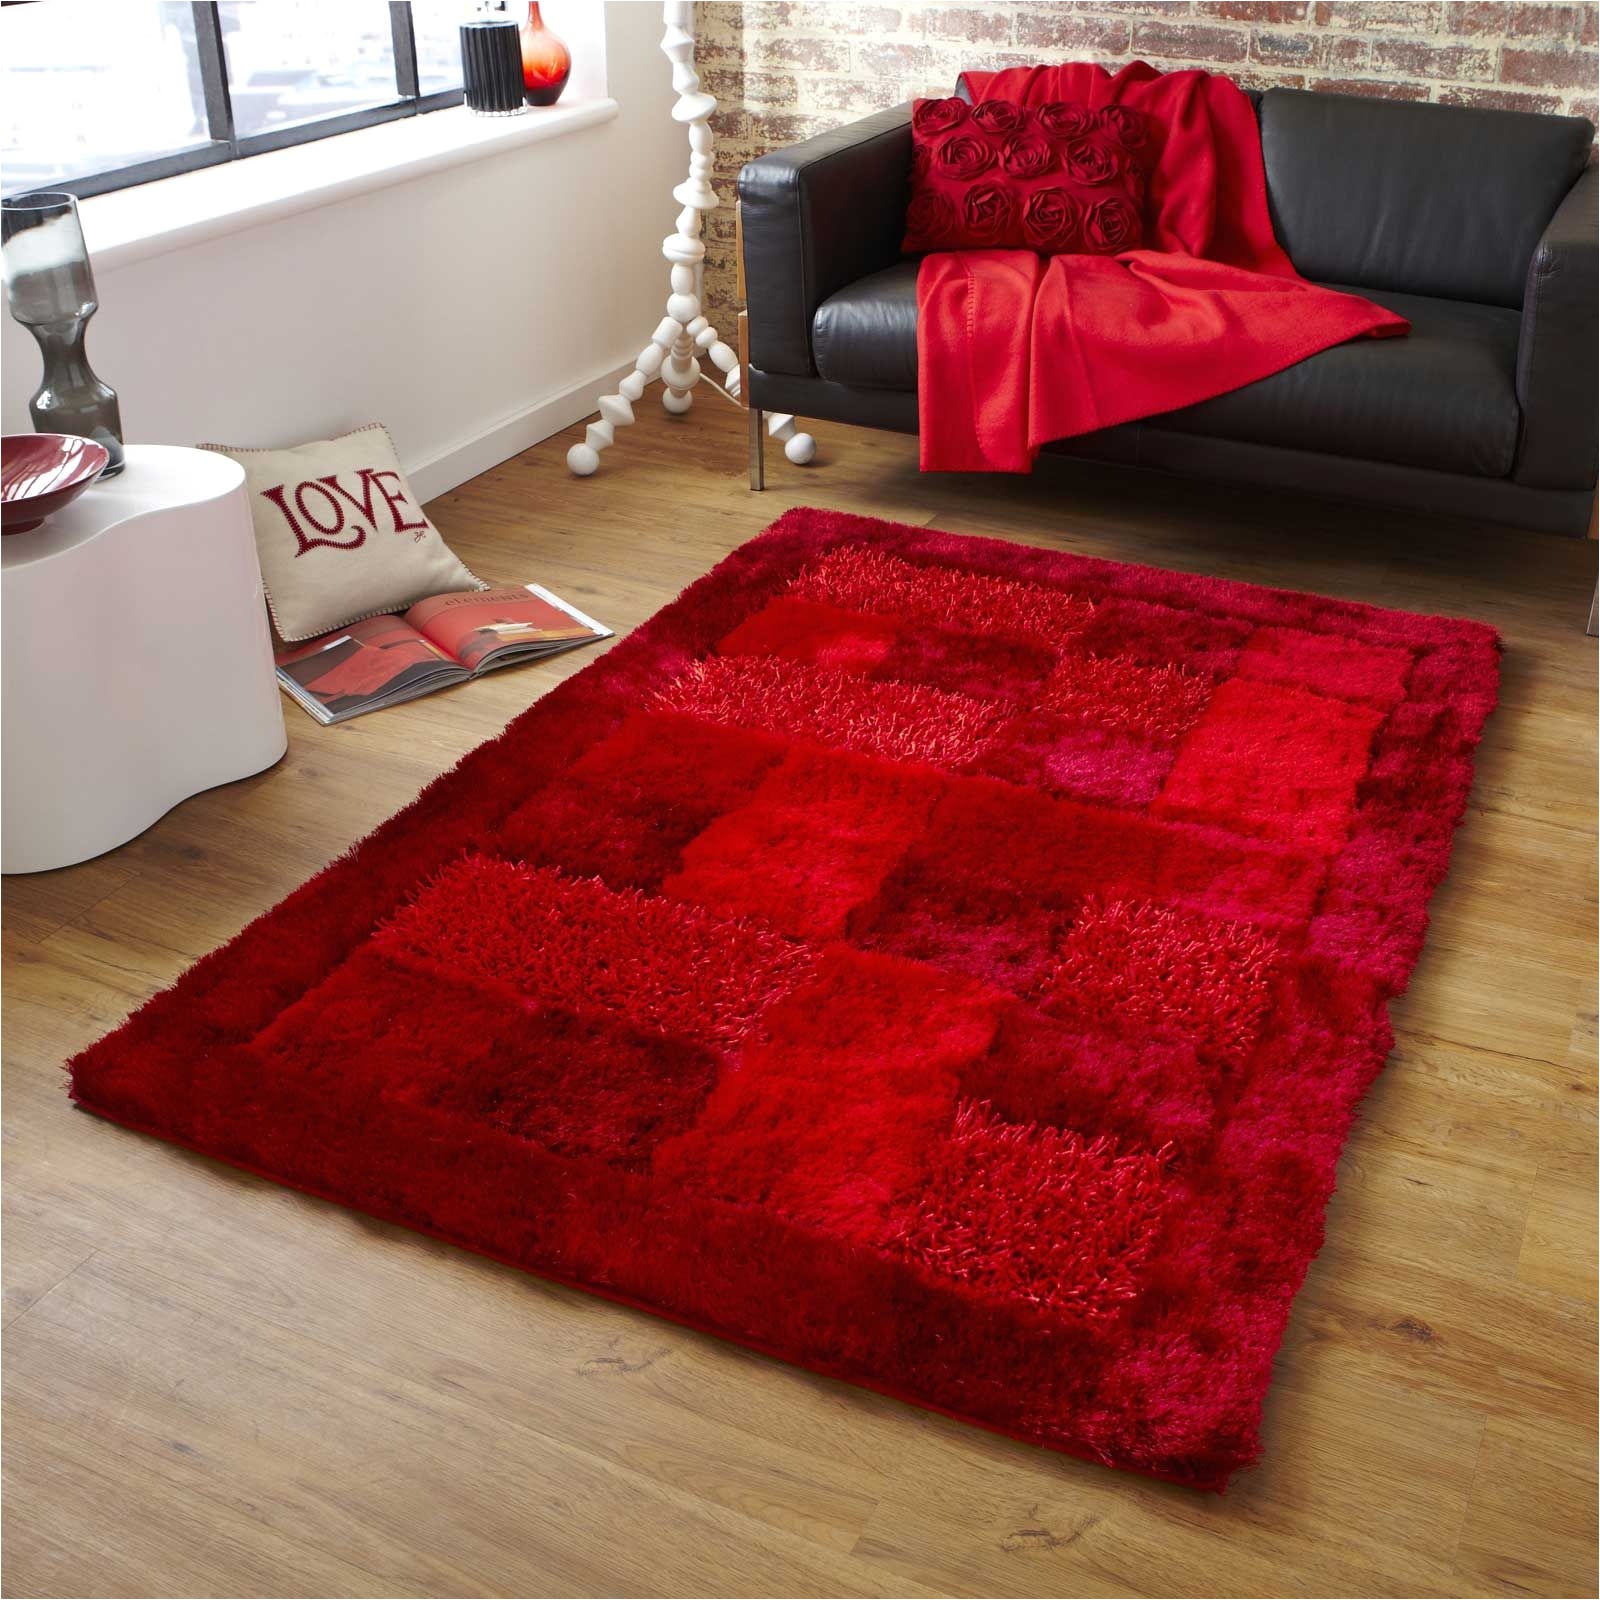 10x12 area rug and red rugs